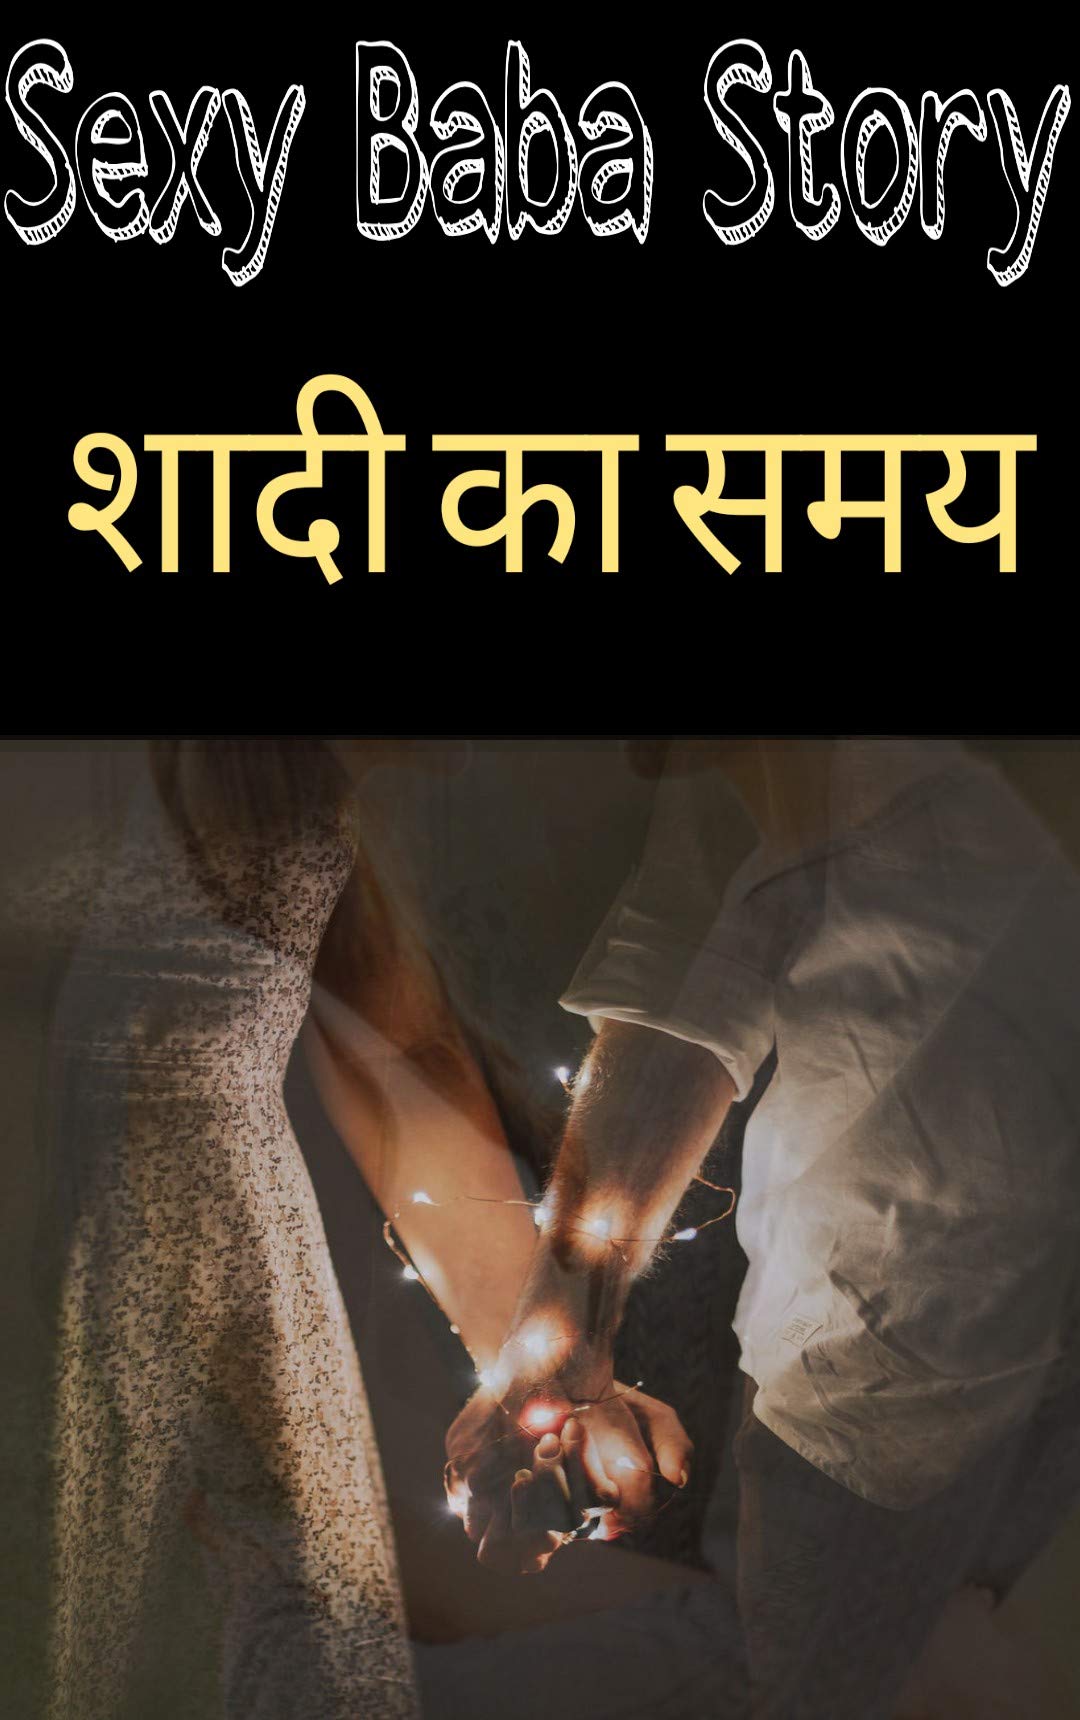 cornelius rogers recommends adult story in hindi pic